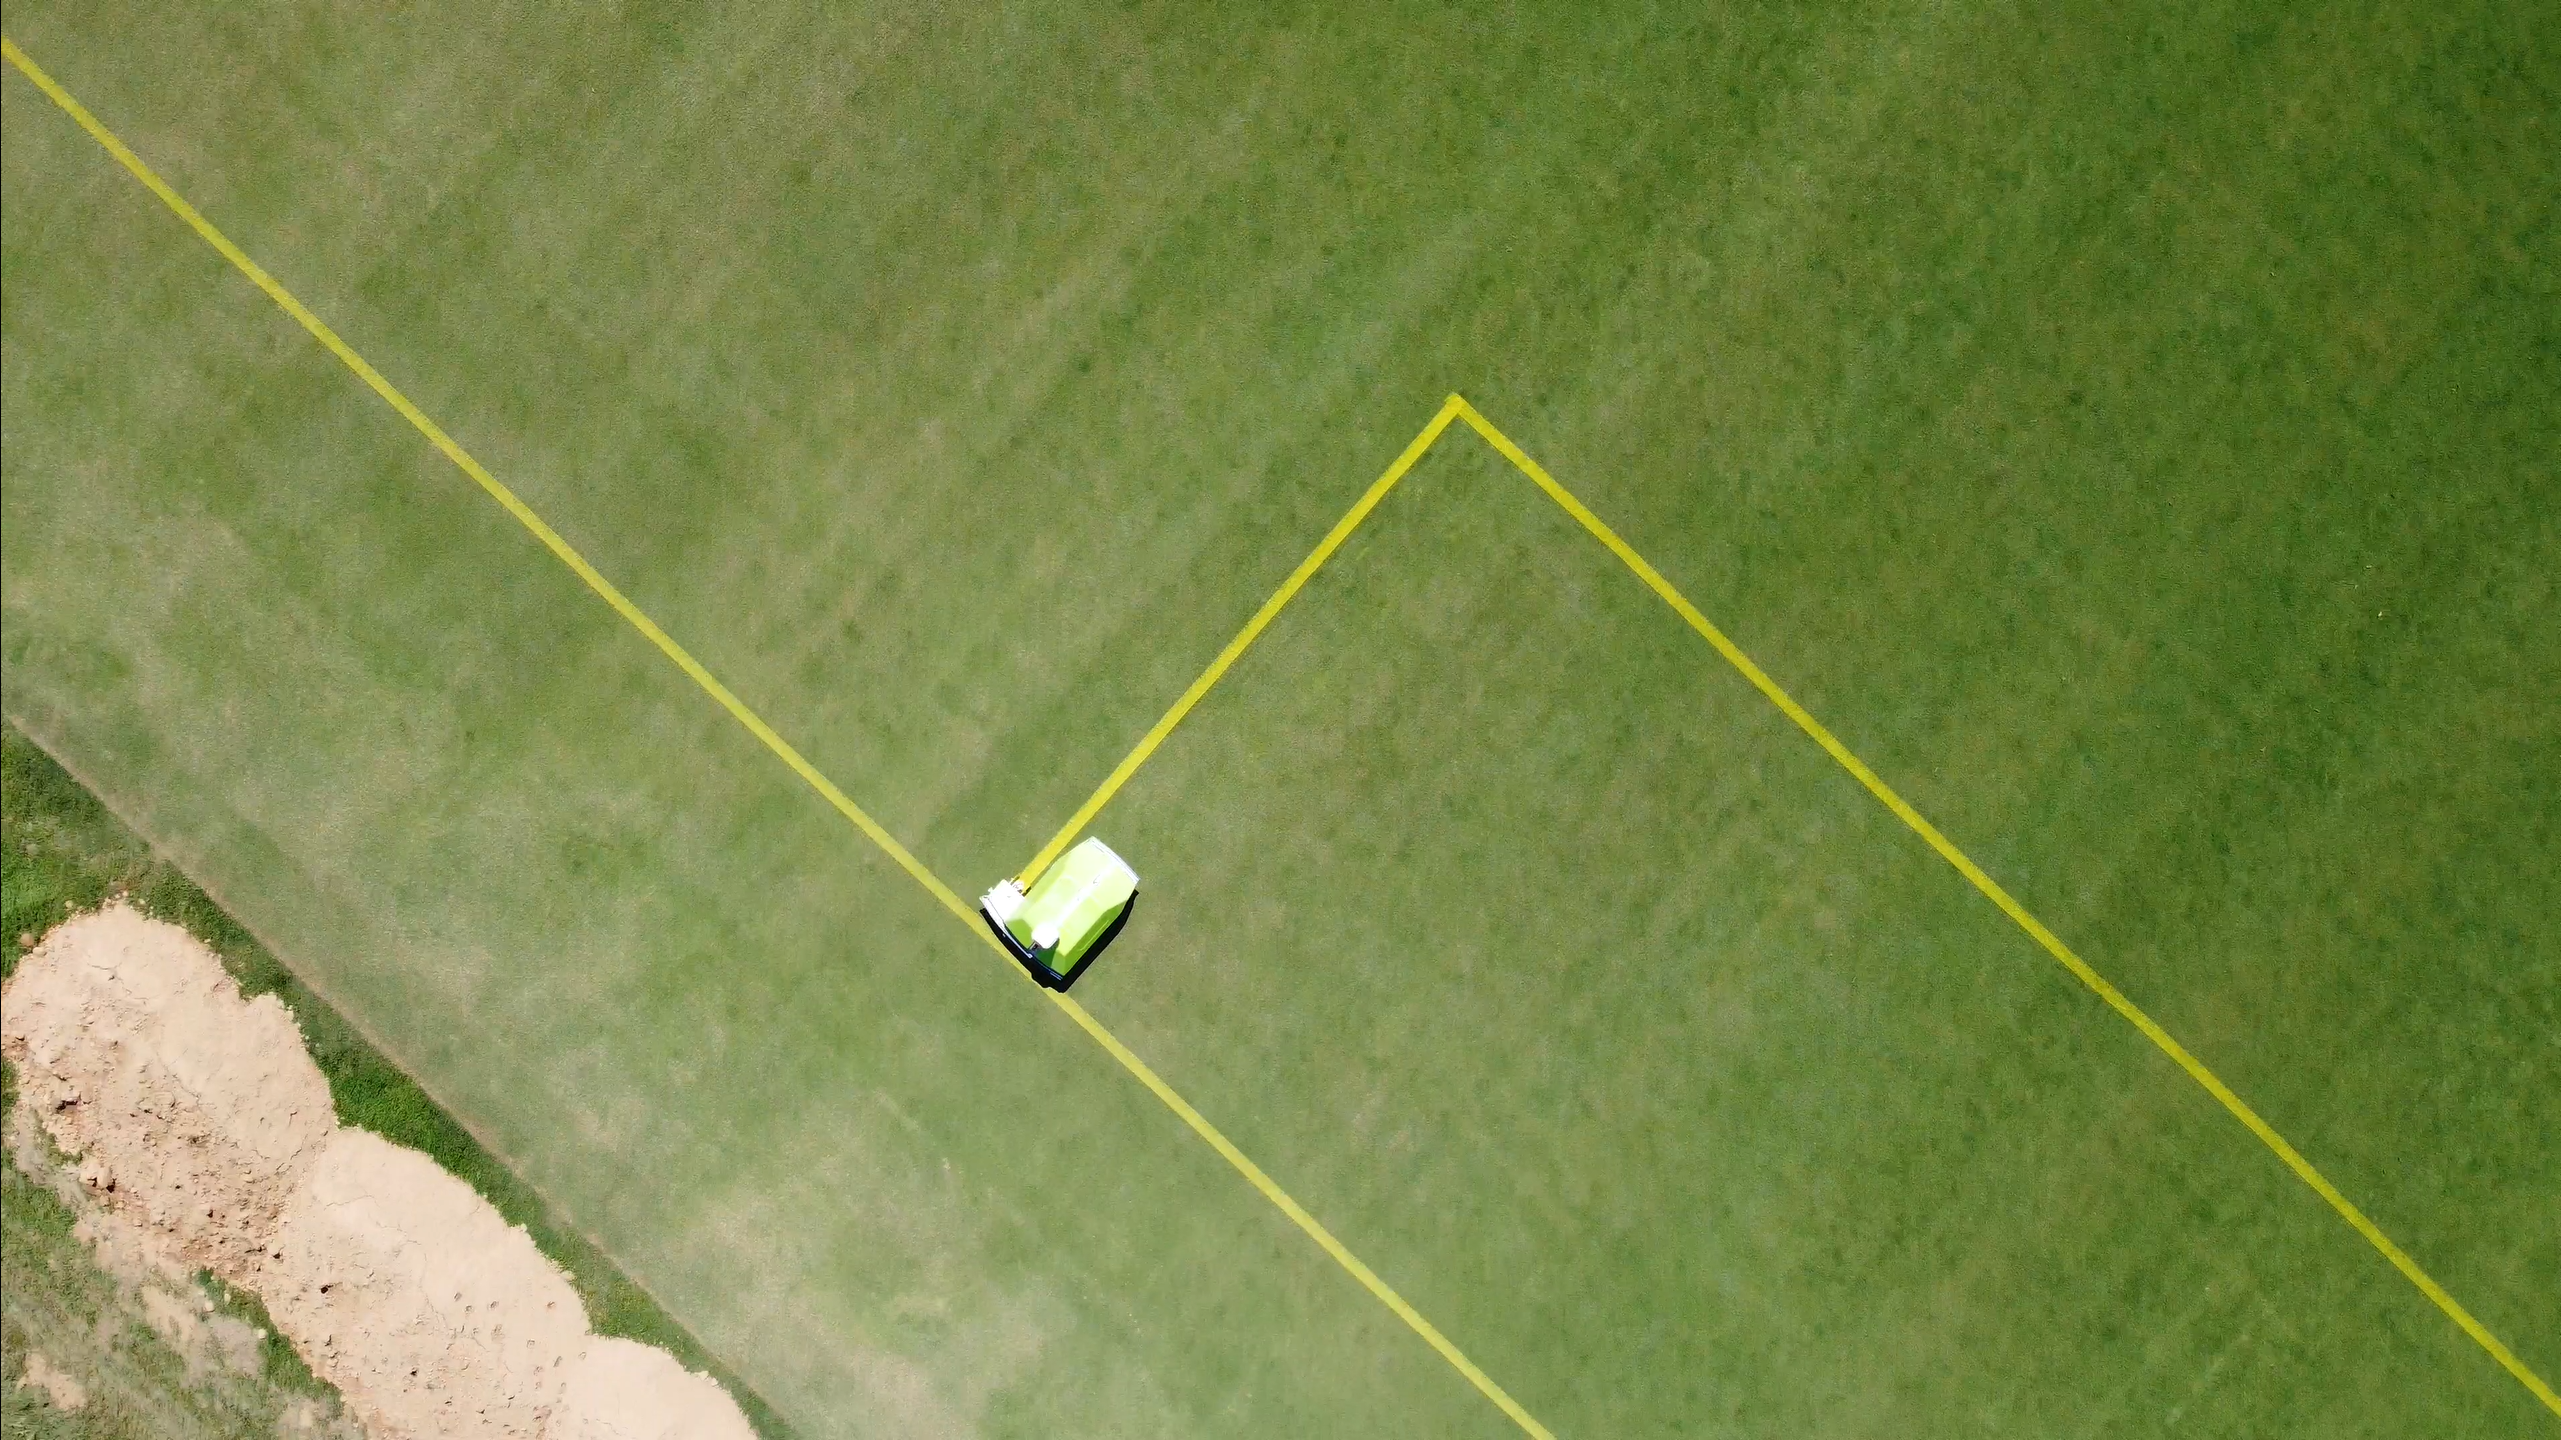 Turf tank robot painting a yellow penalty box on soccer field